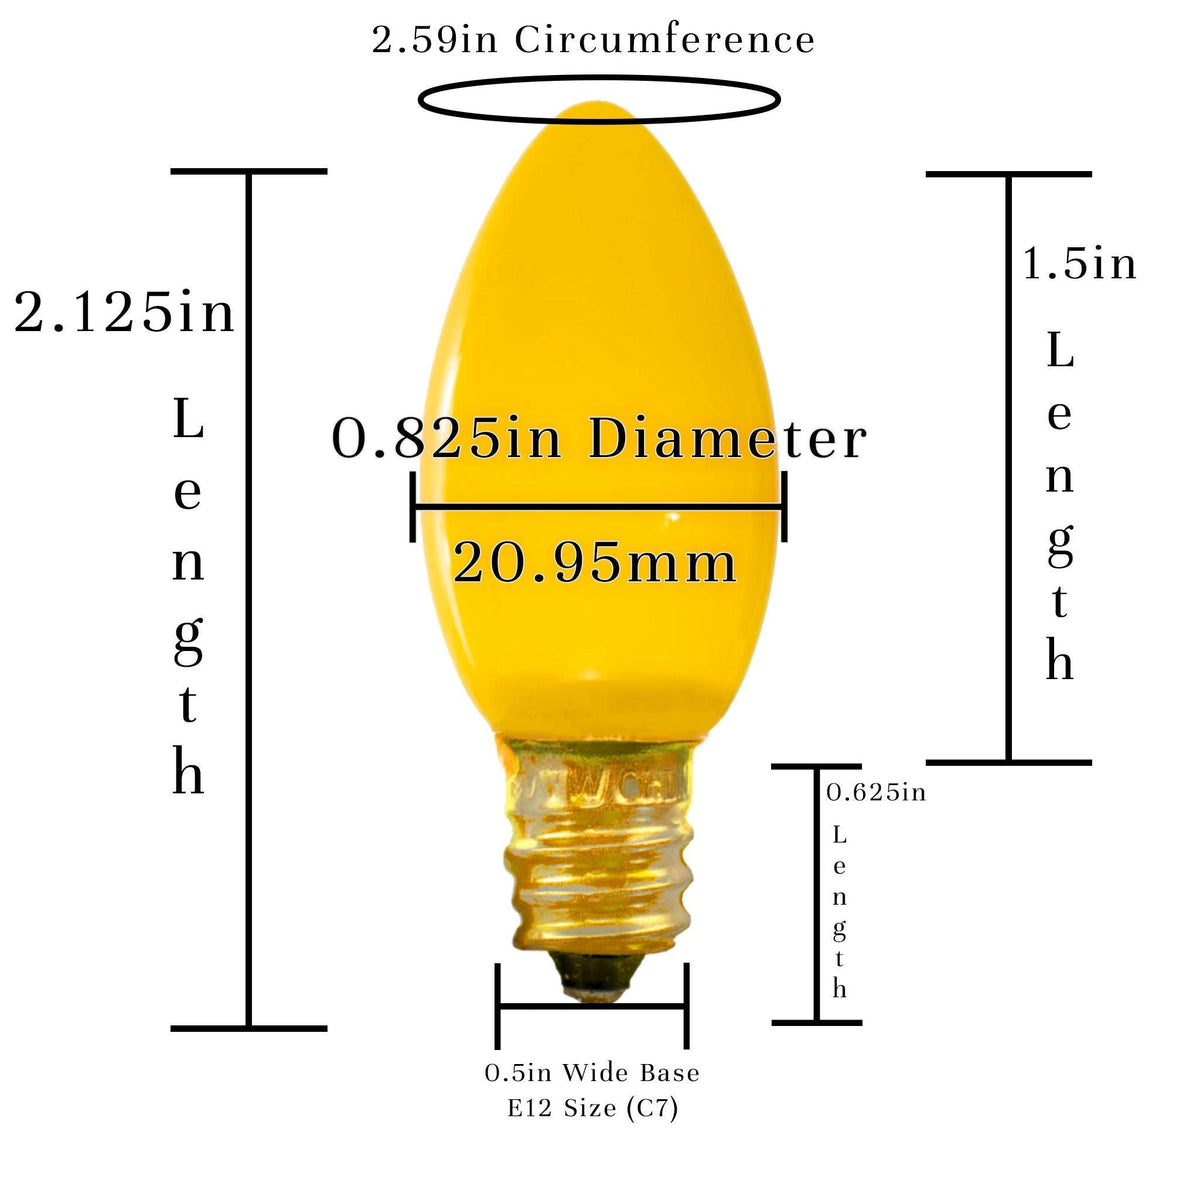 Size of a C7 Candelabra Style Solid Ceramic Multicolor Light Bulb from Lee Display